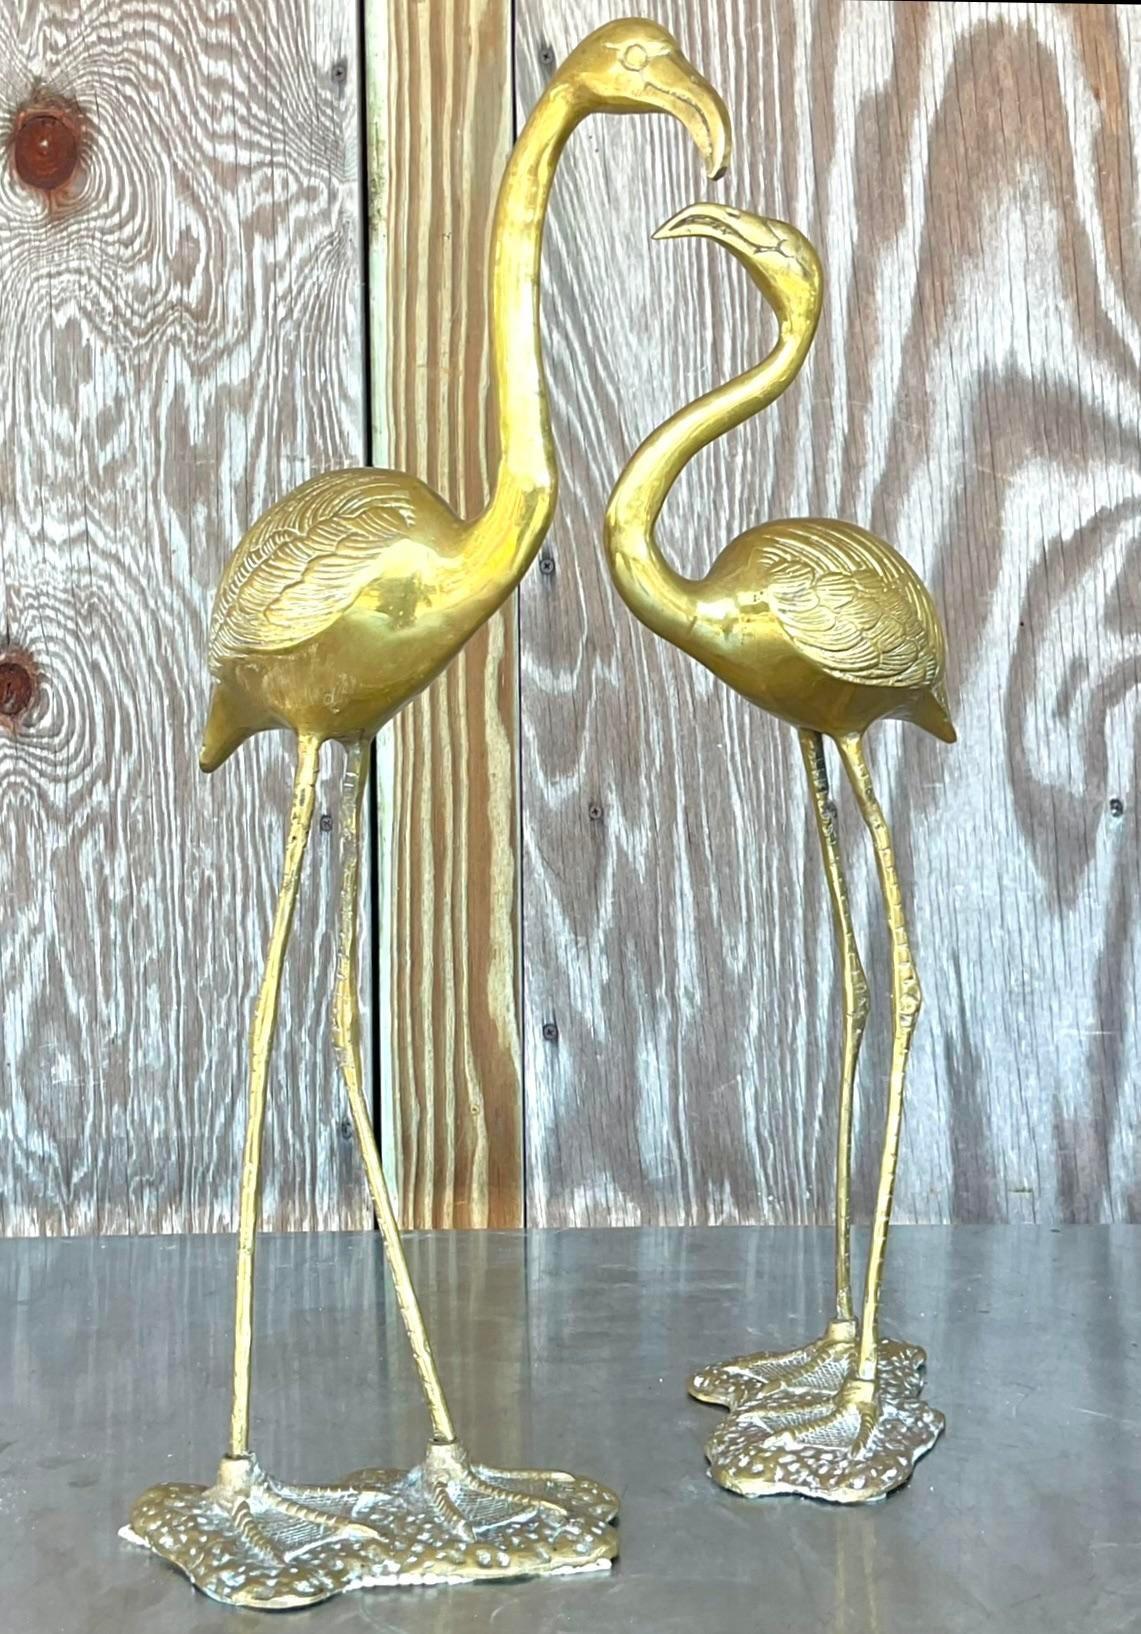 American Craftsman Vintage Coastal 1960s Solid Brass Flamingos - a Pair For Sale